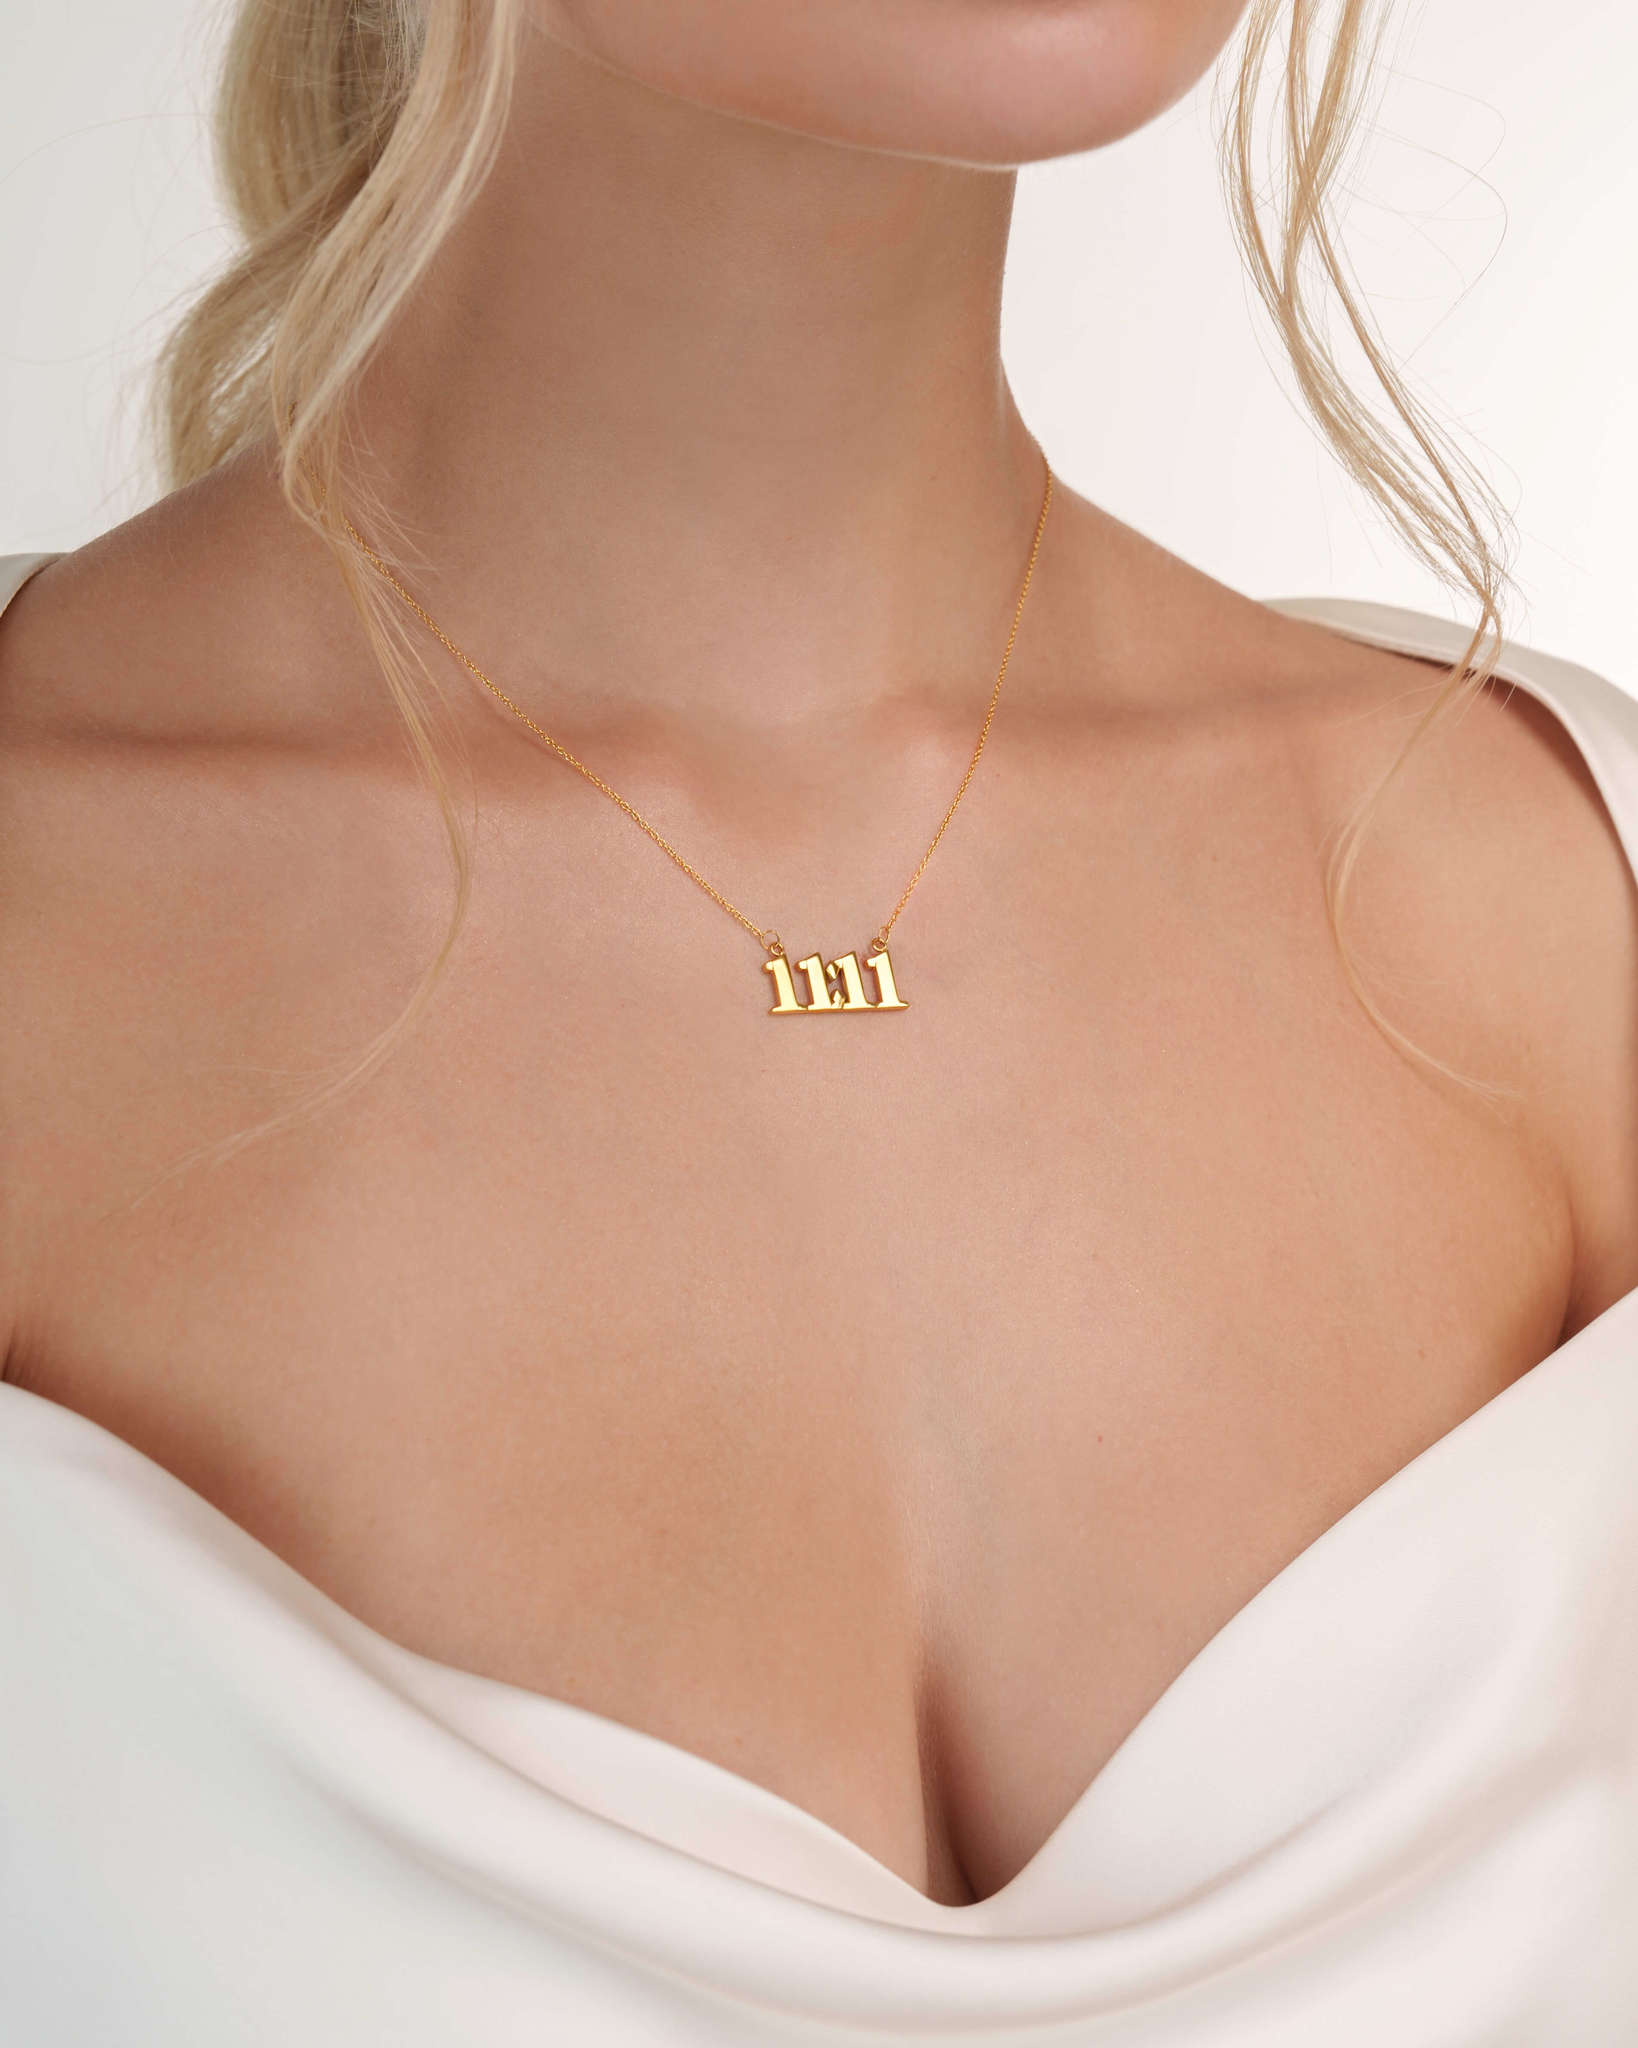 Angel Number Pendant Necklace Layered Necklace Wish Card 000 1111 111 222  333 444 555 666 777 888 Numerology Lucky BFF Friendship Jewelry For Women  Girls From Ifashion89, $1.09 | DHgate.Com